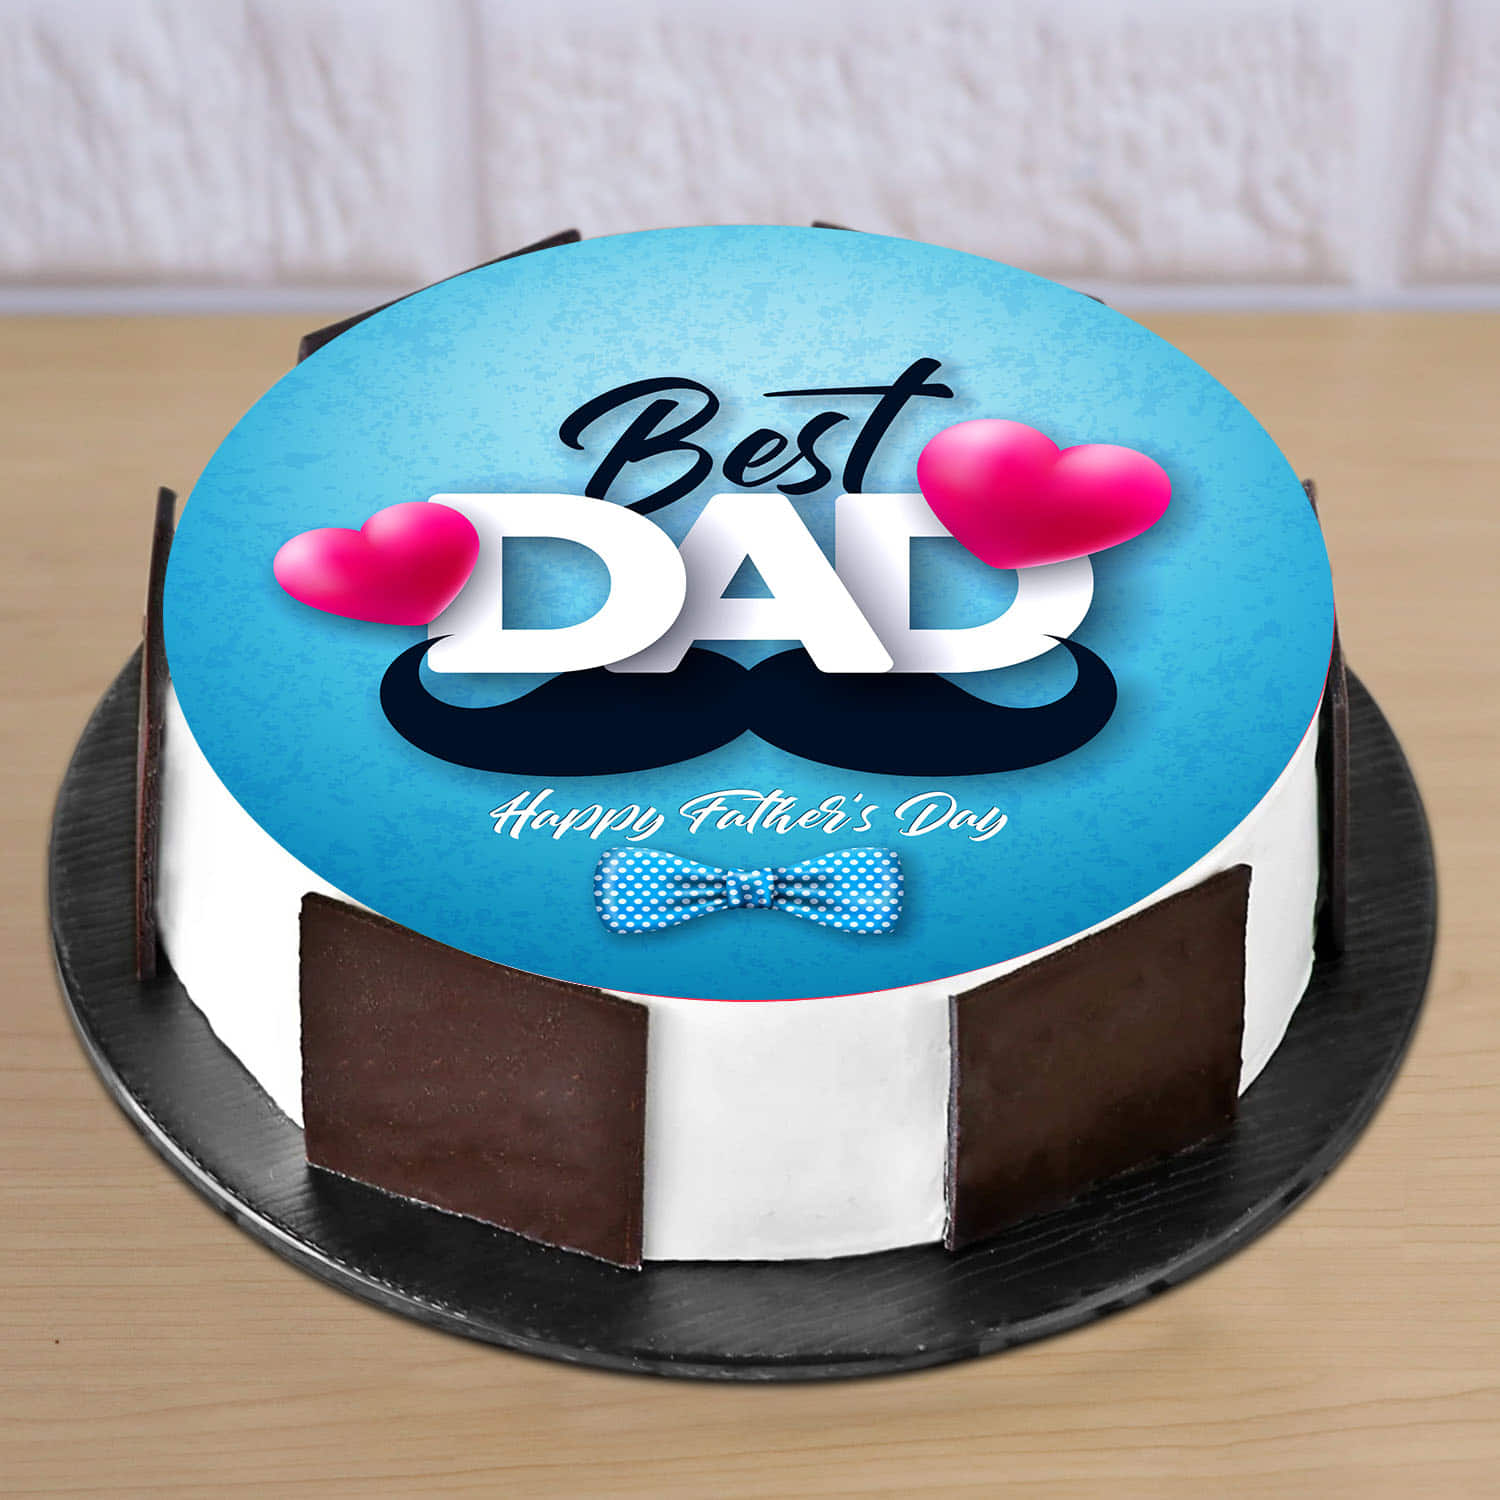 Happy Fathers Day Cake | Cake for Dad | Yummy Cake